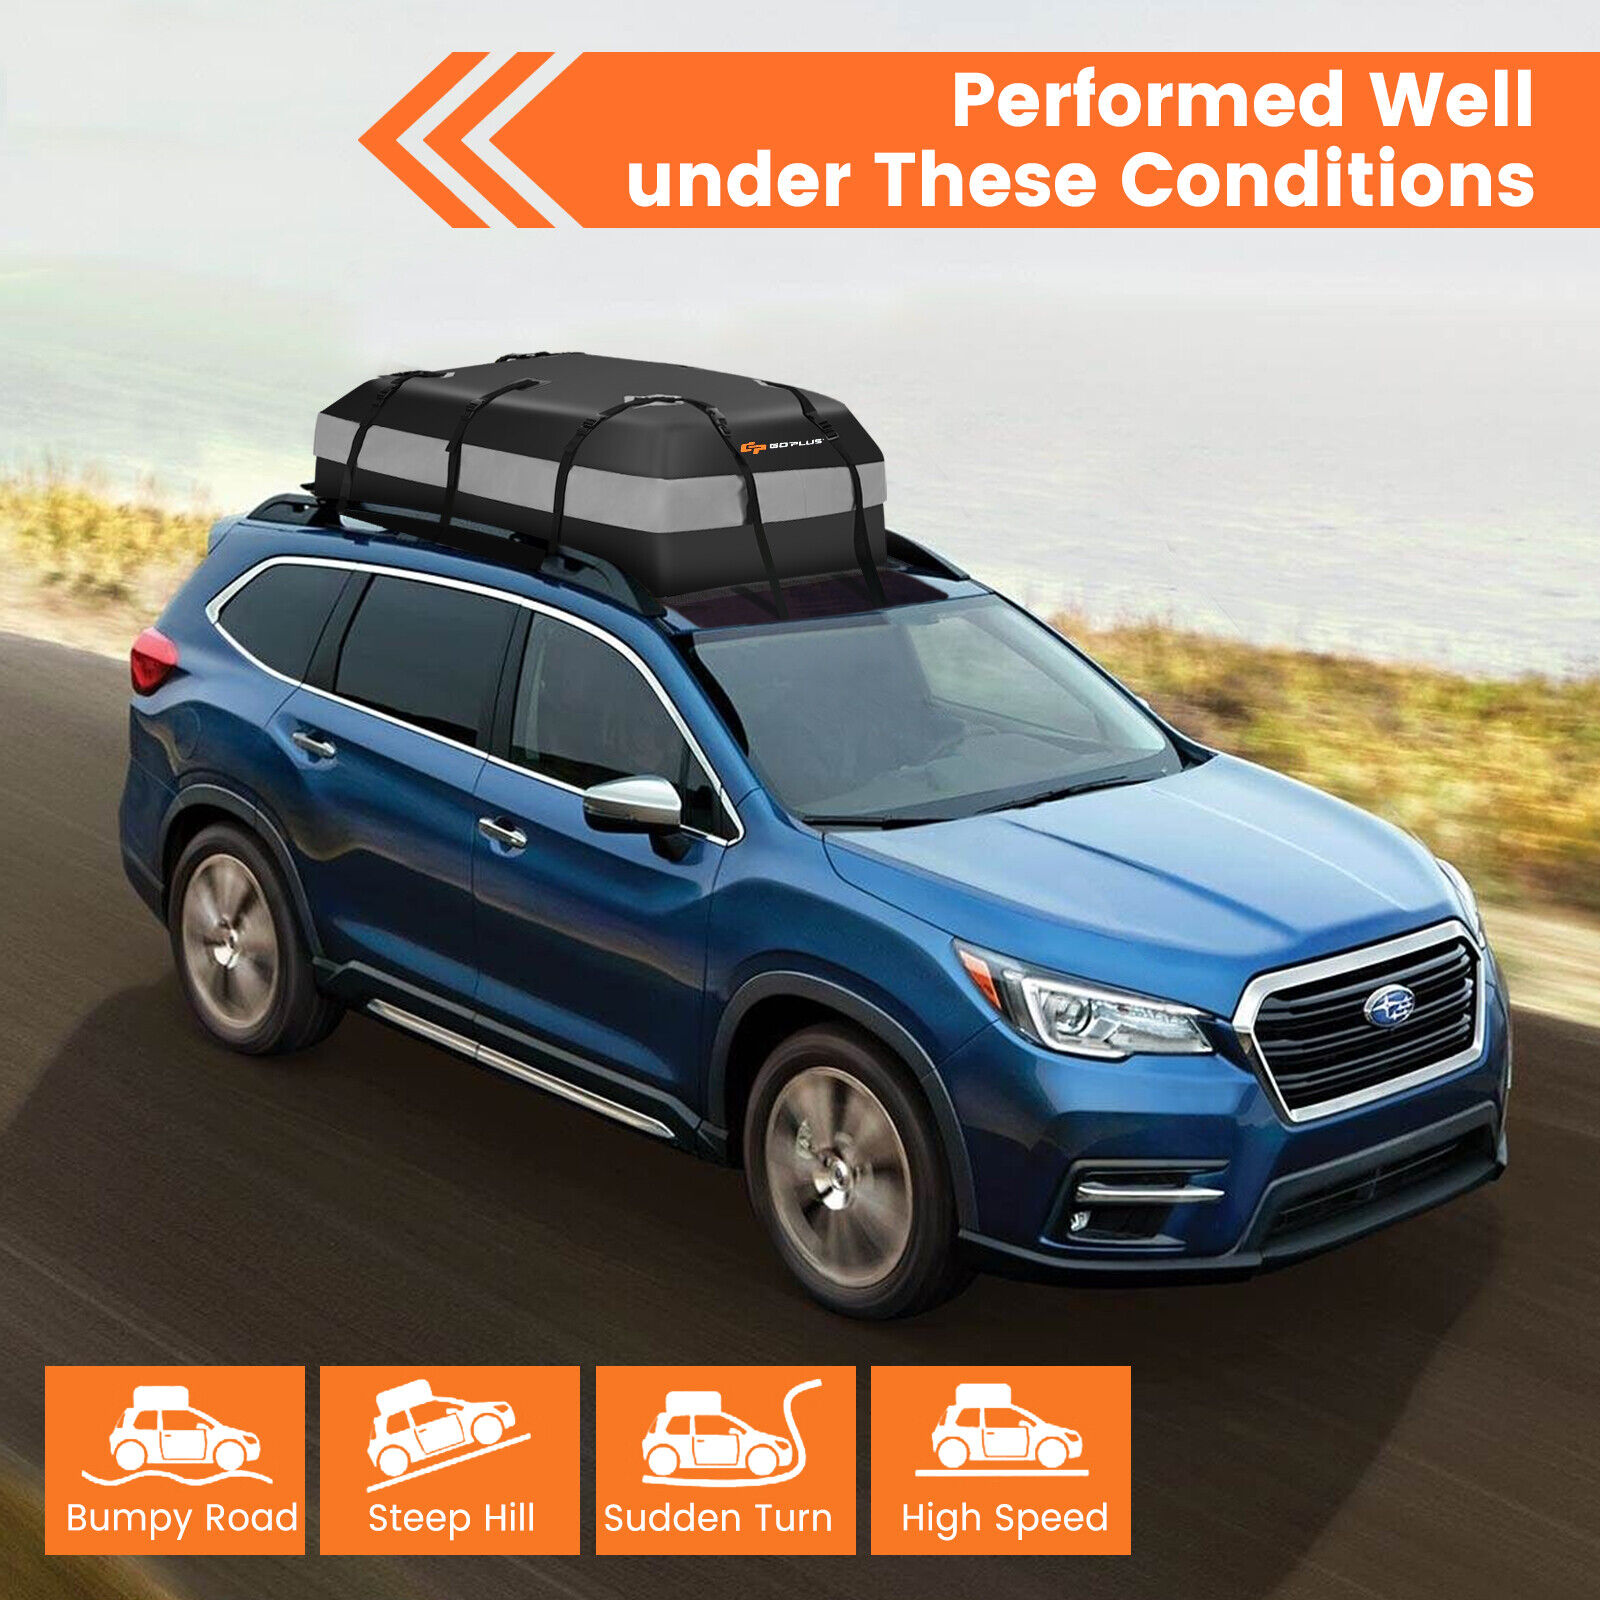 Great Choice Products 15 Cubic Feet Car Roof Bag Rooftop Cargo Carrier Waterproof Luggage Bag Grey